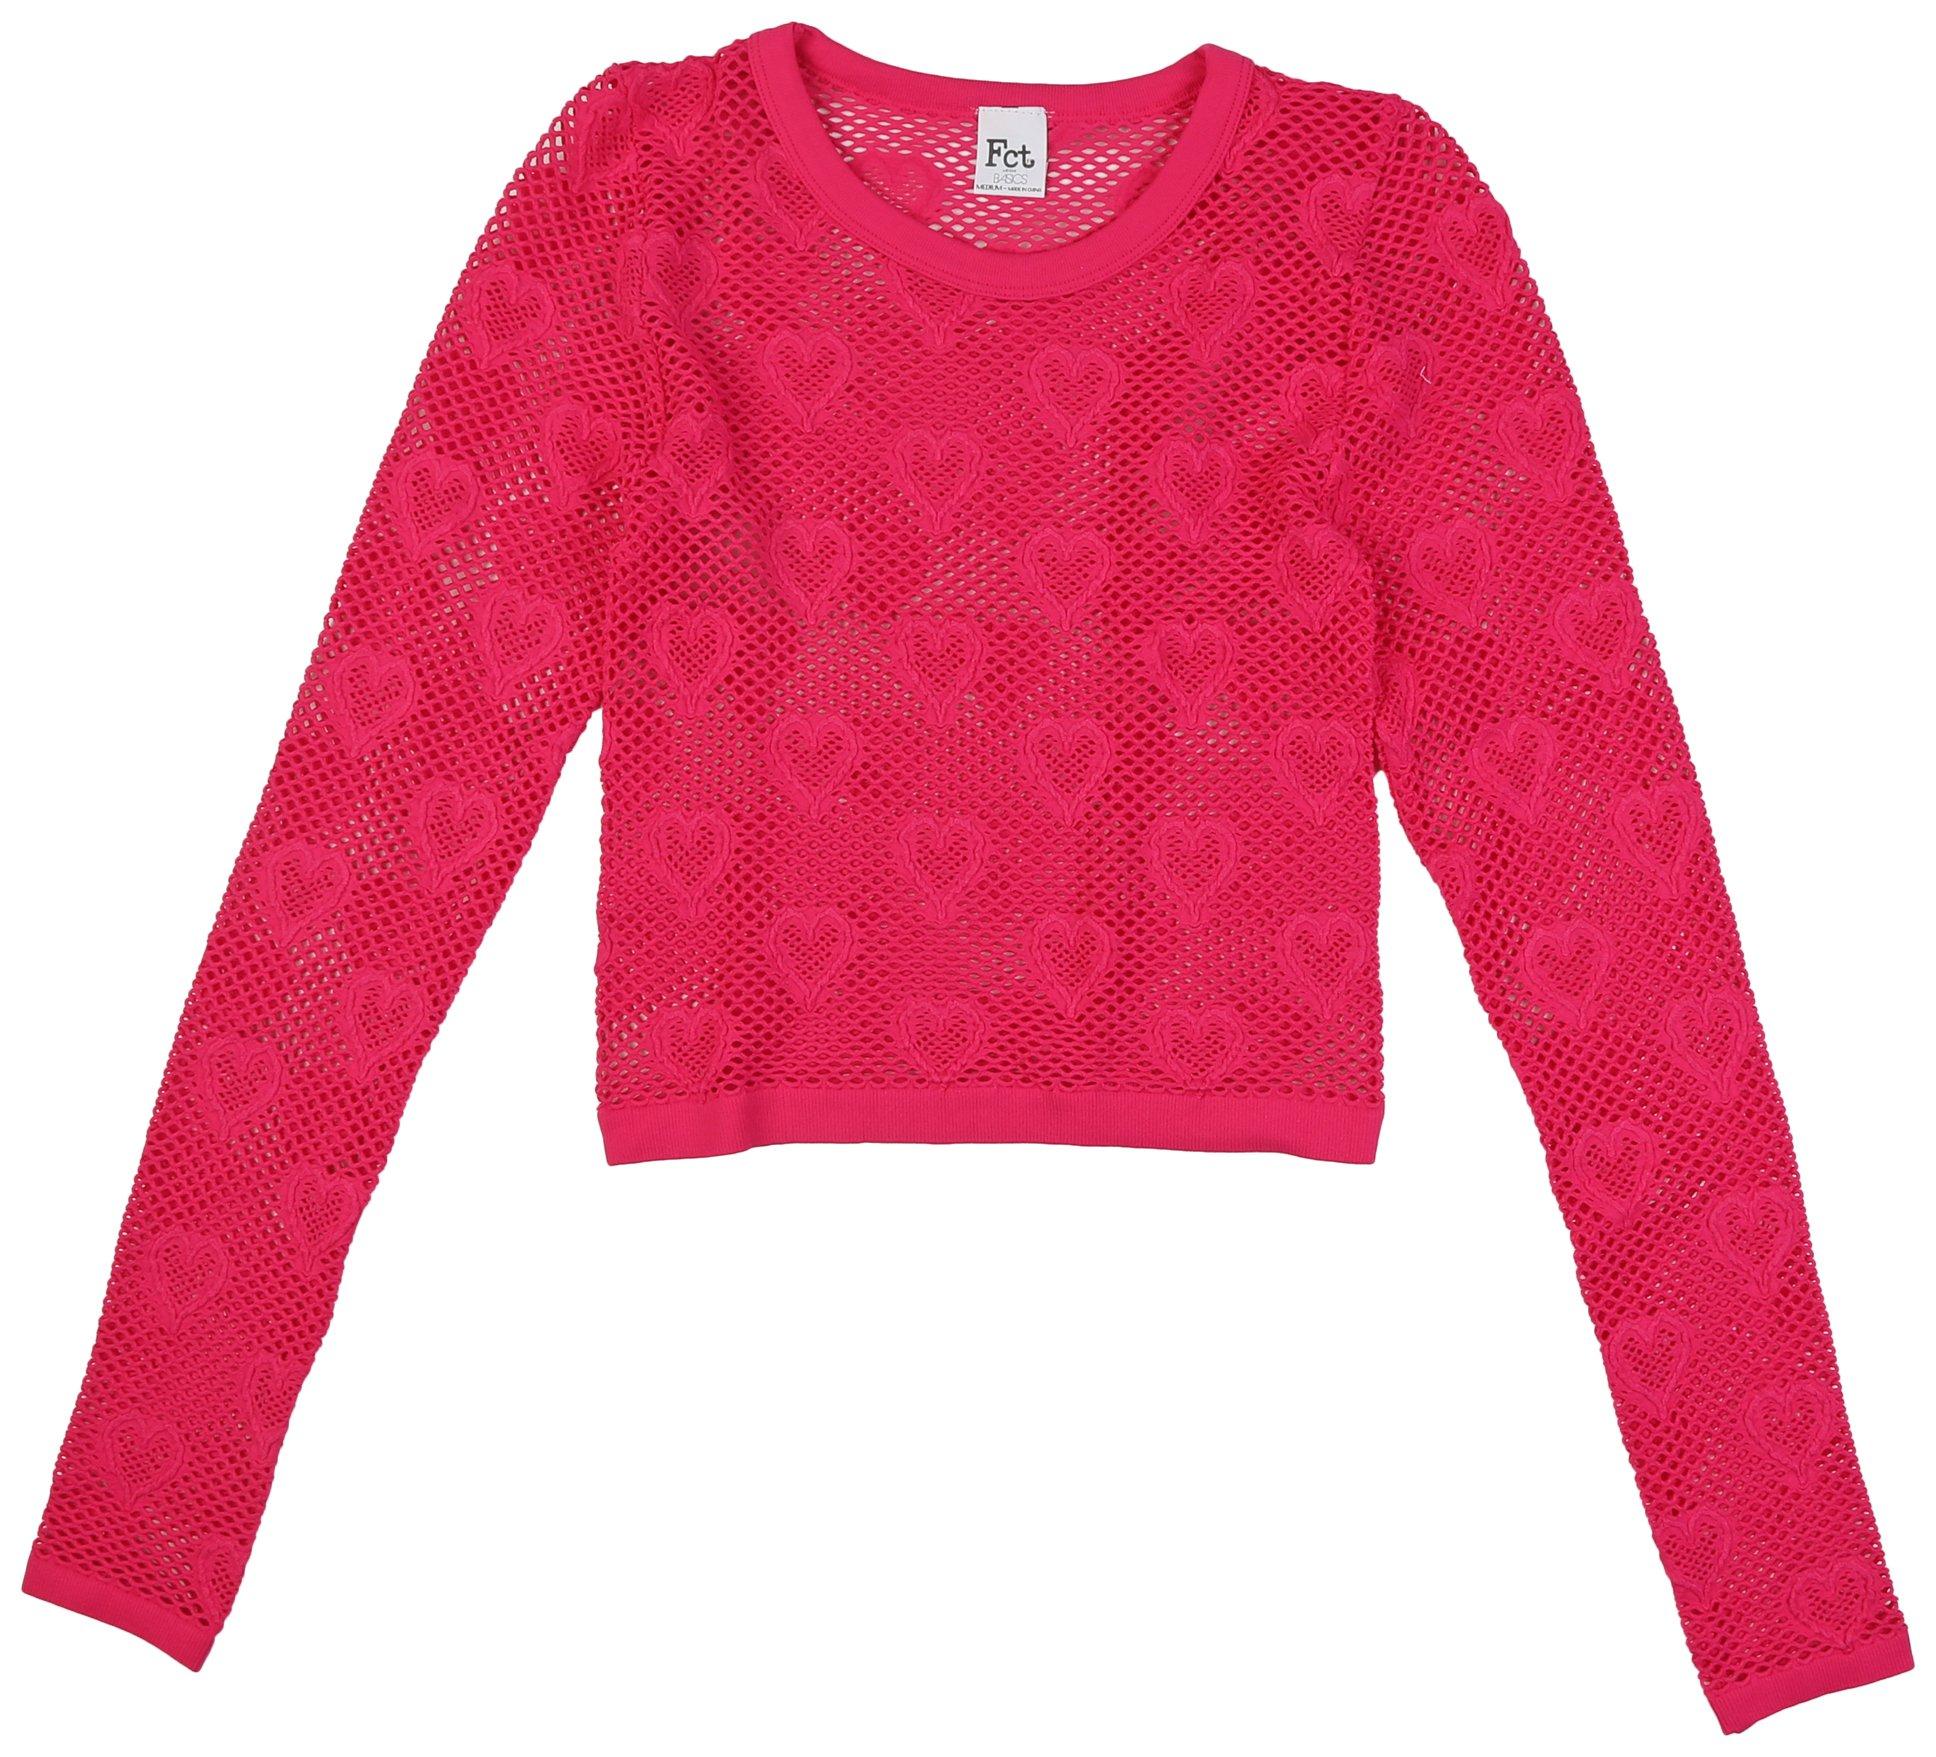 Full Circle Trends Juniors Hearts Open Weave Pullover